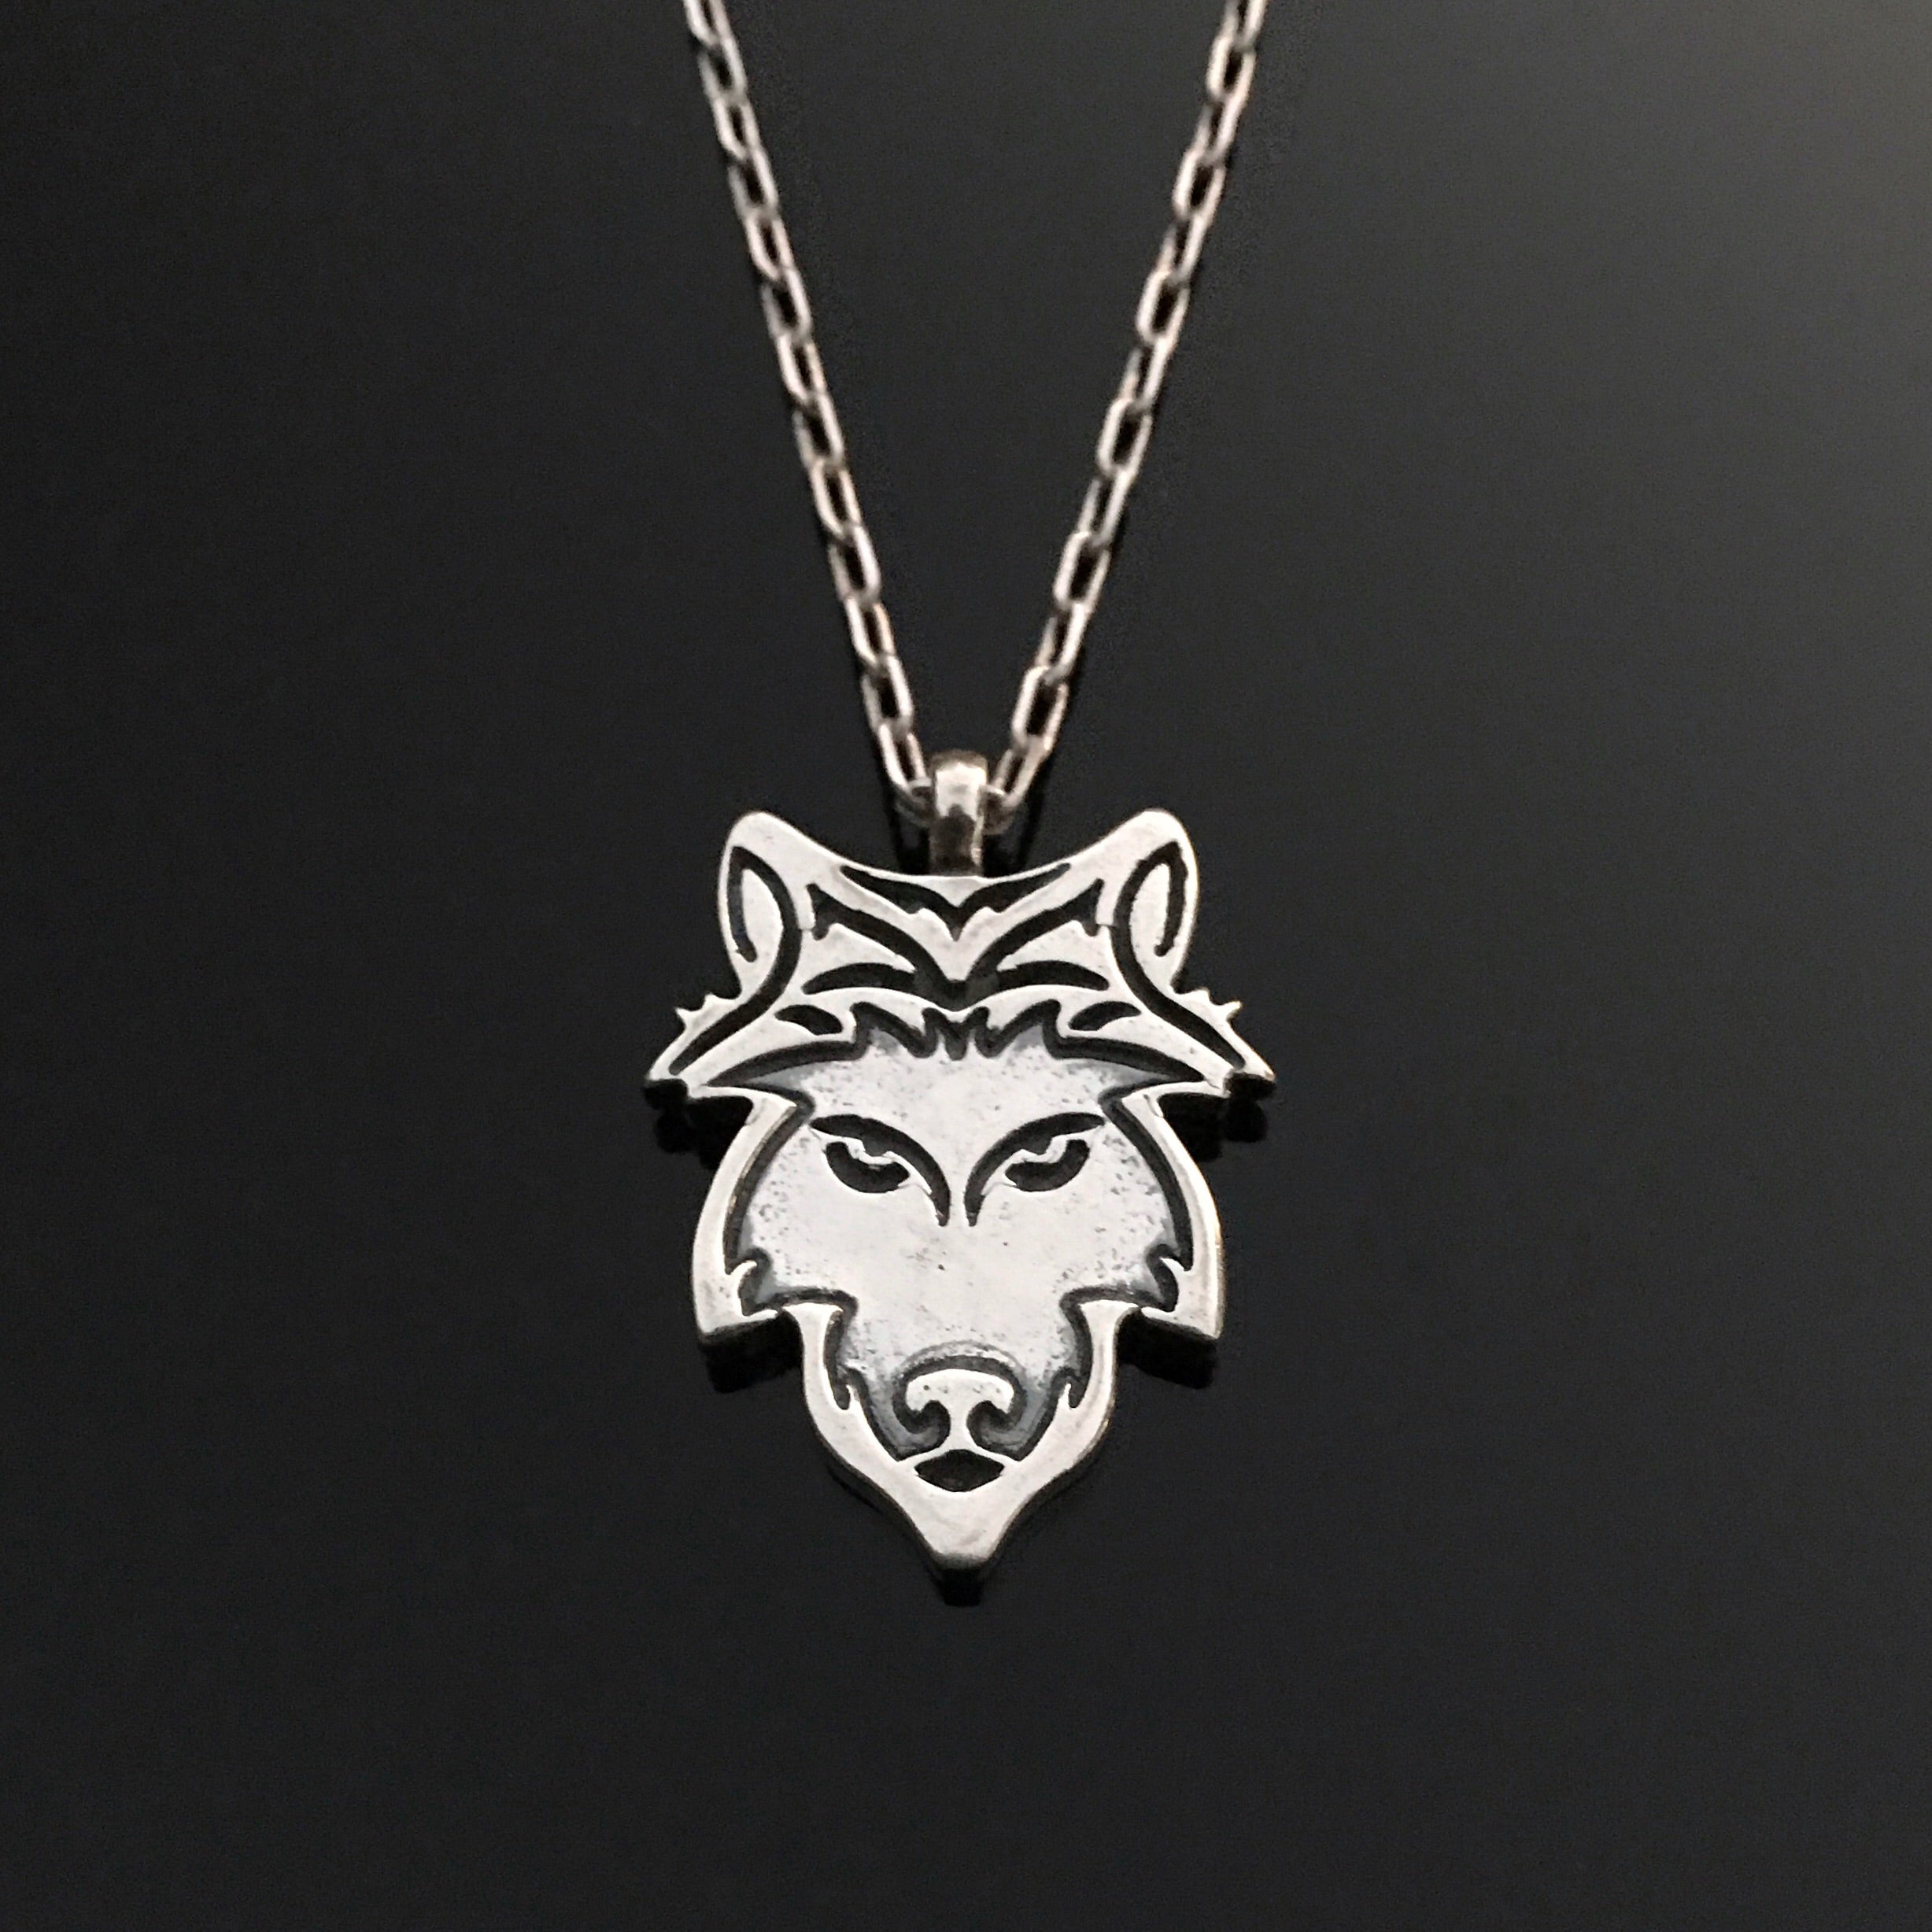 STRENGTH Loyal Wolf Necklace - Sterling Silver